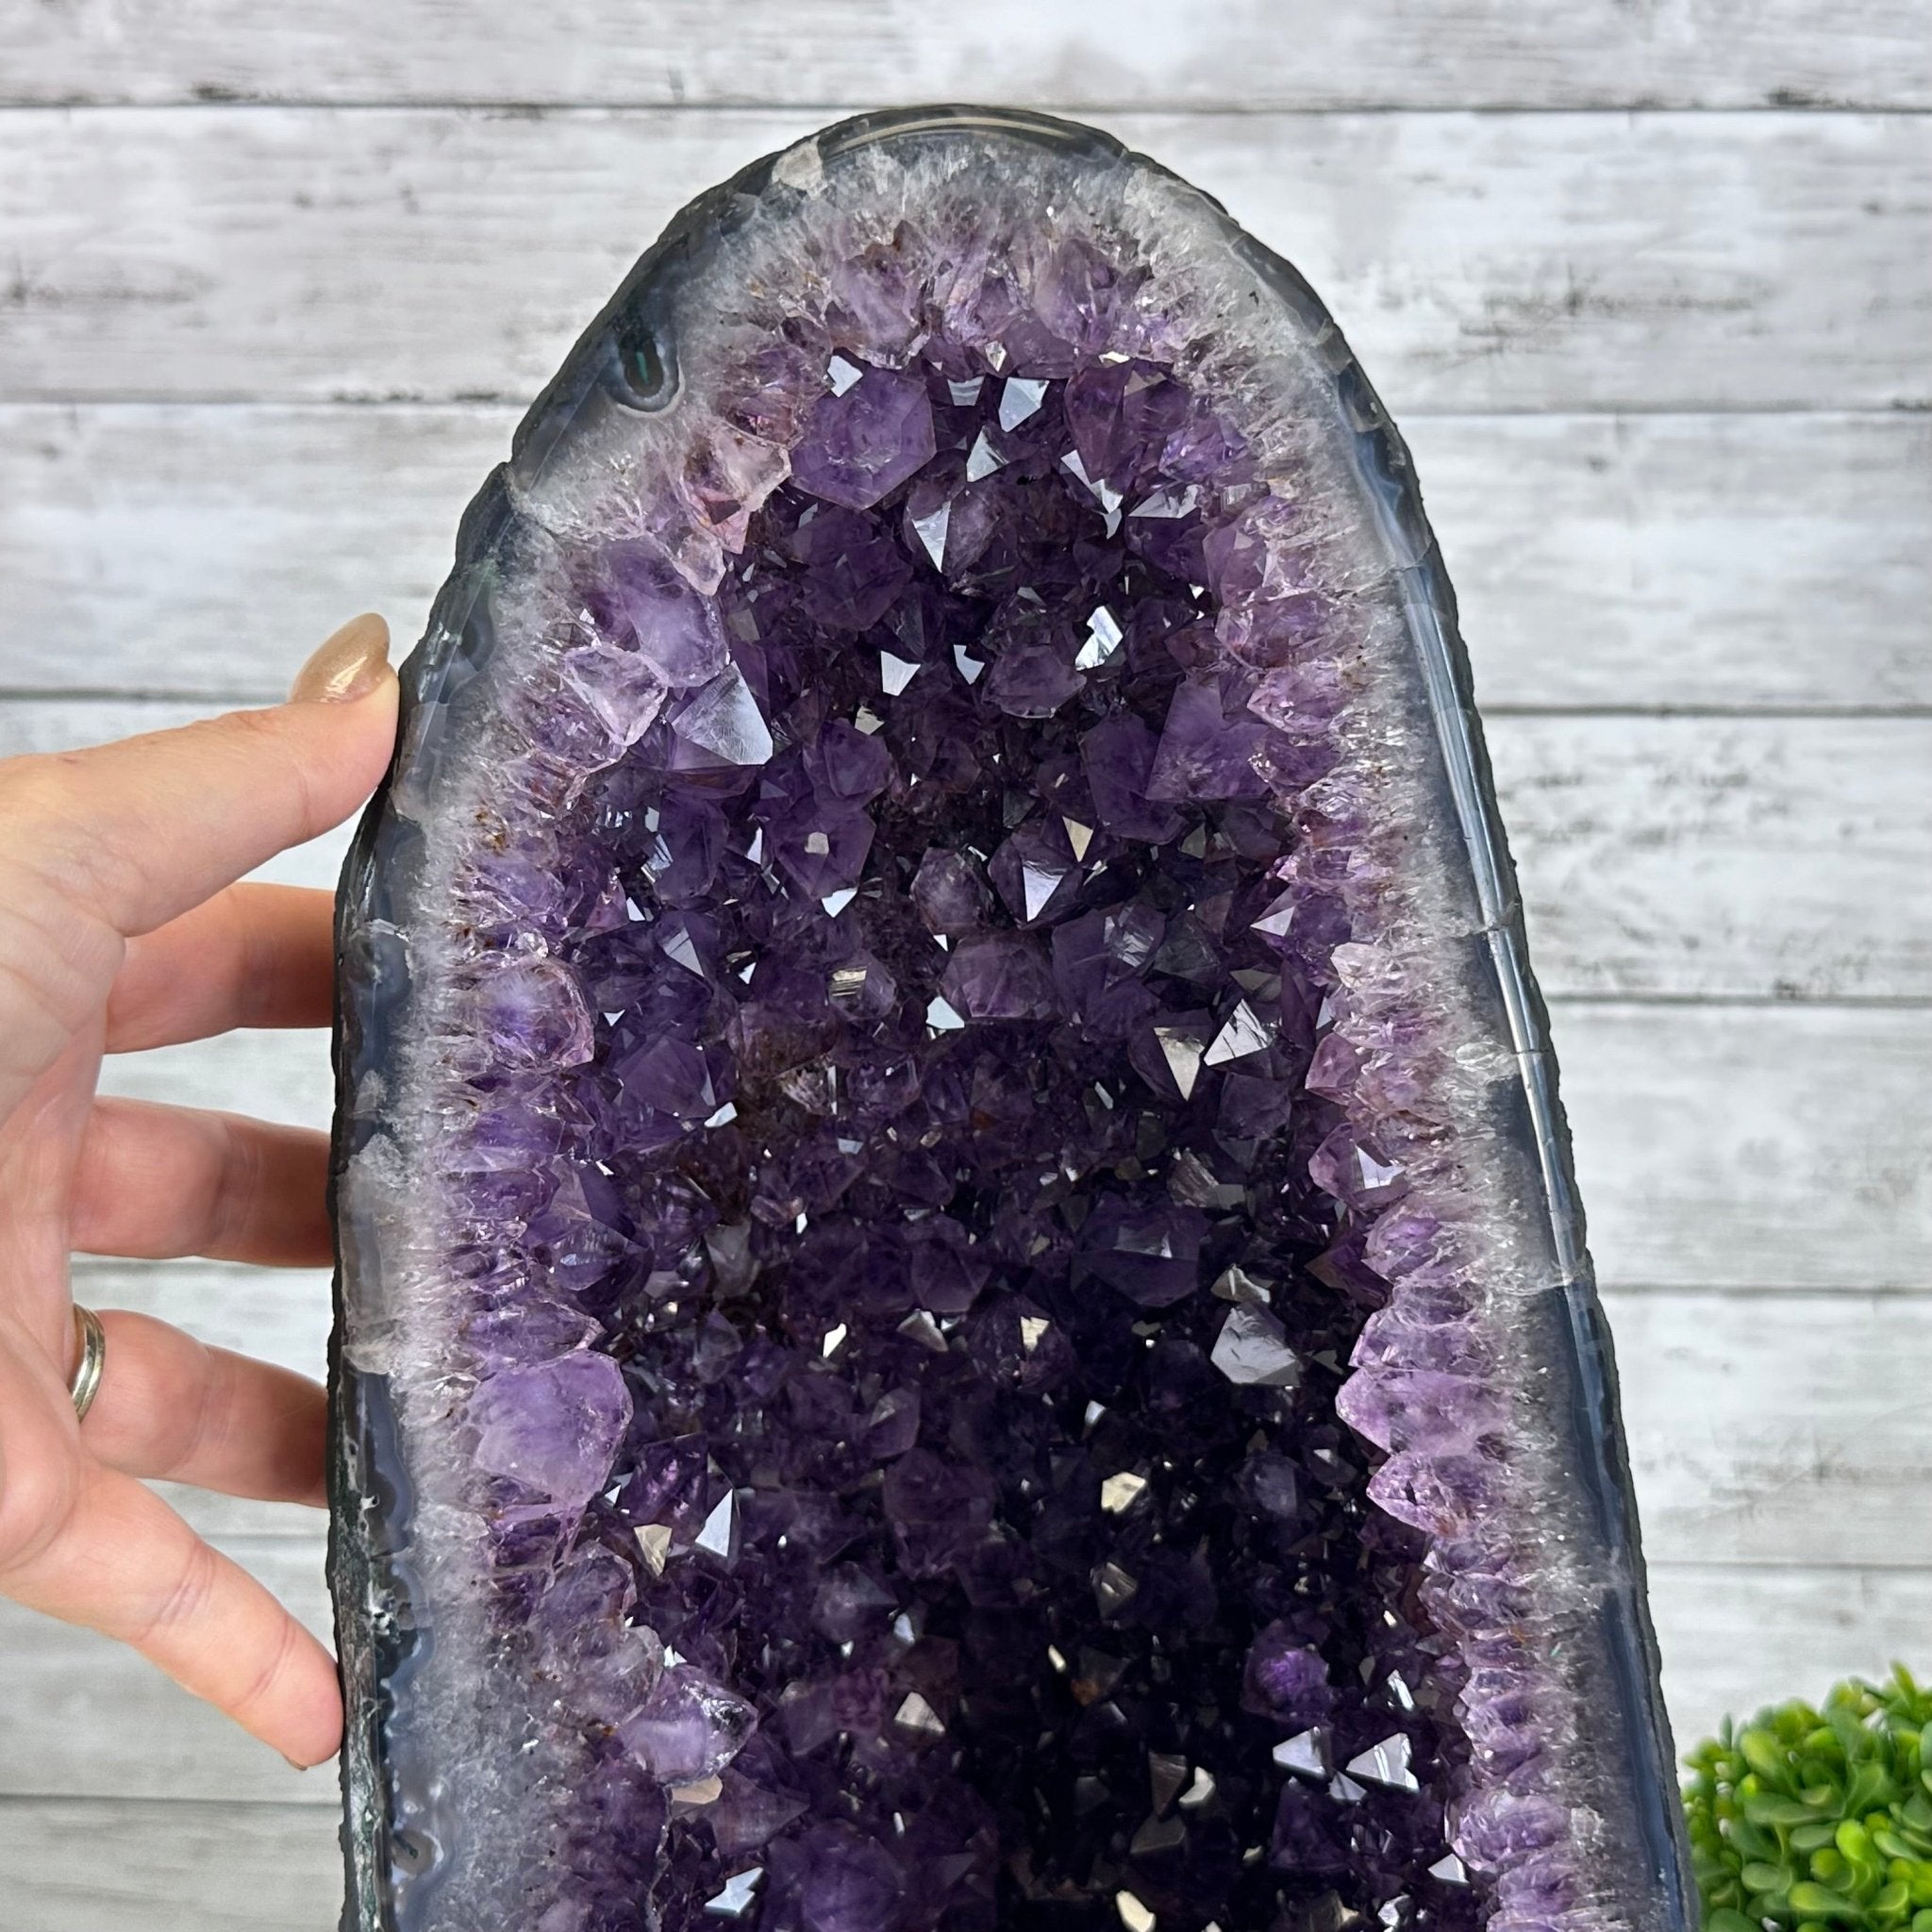 Quality Brazilian Amethyst Cathedral, 33.3 lbs & 17.2" Tall, #5601 - 1410 - Brazil GemsBrazil GemsQuality Brazilian Amethyst Cathedral, 33.3 lbs & 17.2" Tall, #5601 - 1410Cathedrals5601 - 1410